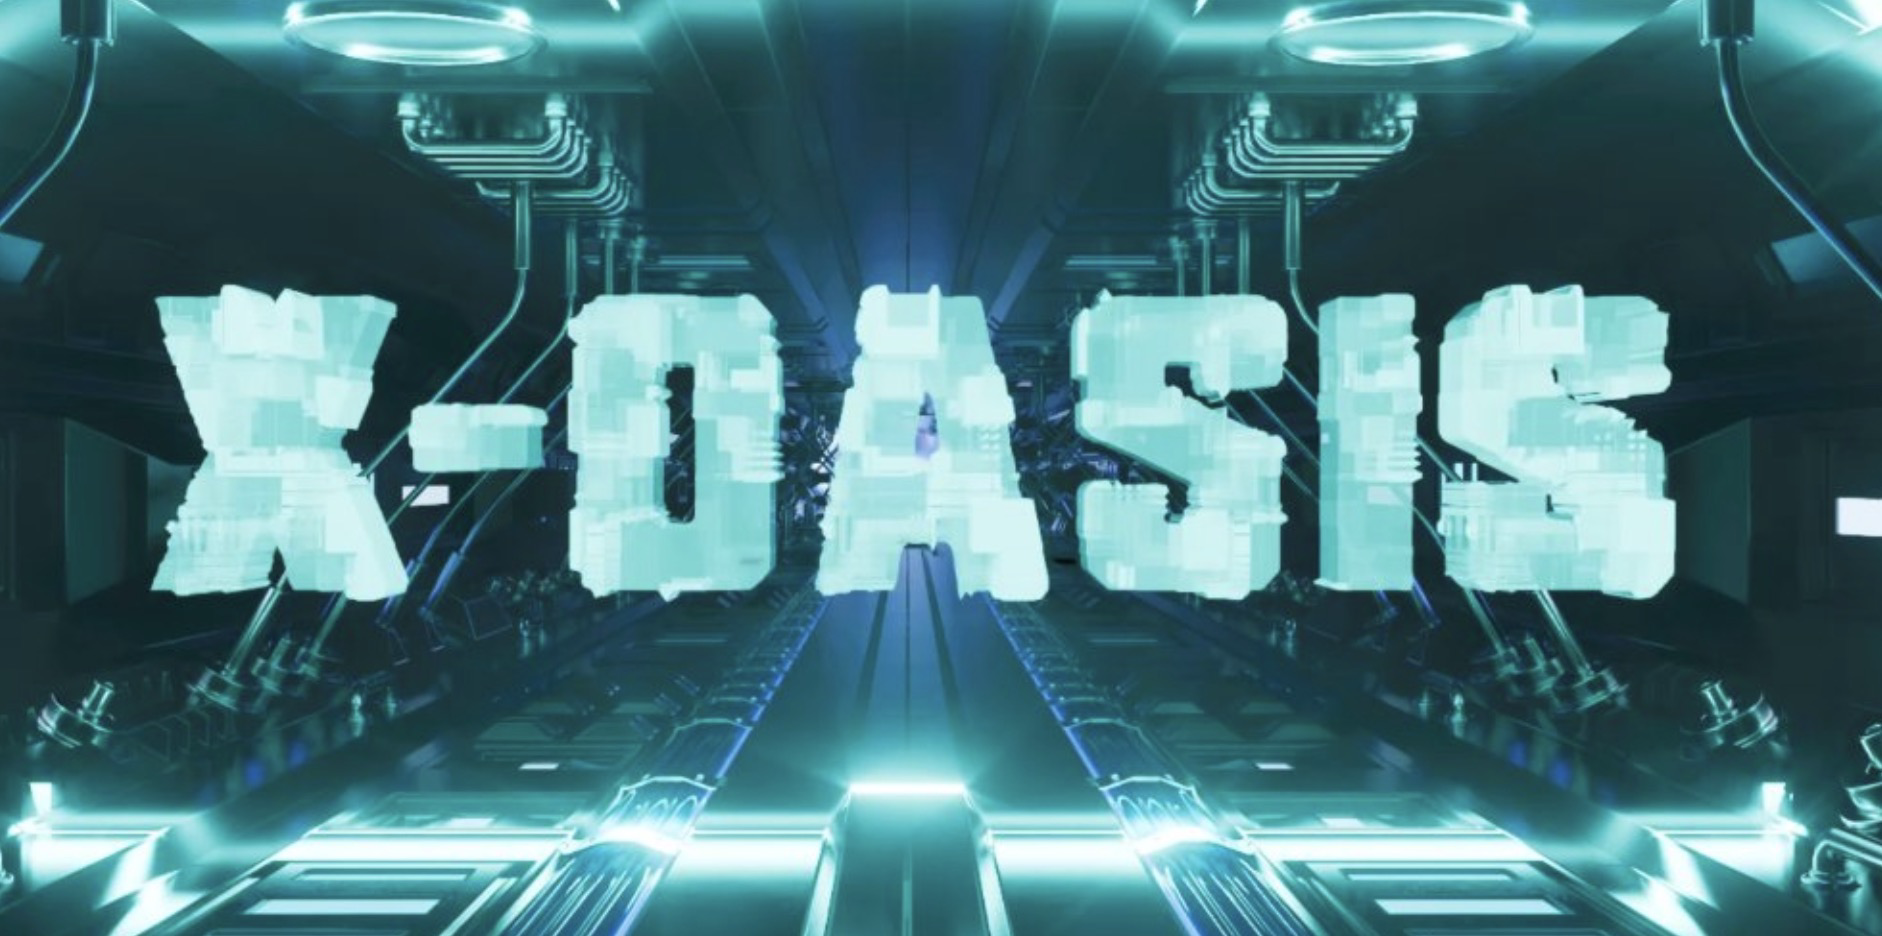 X-Oasis -Don’t Miss a World Class NFT Game/Community Project